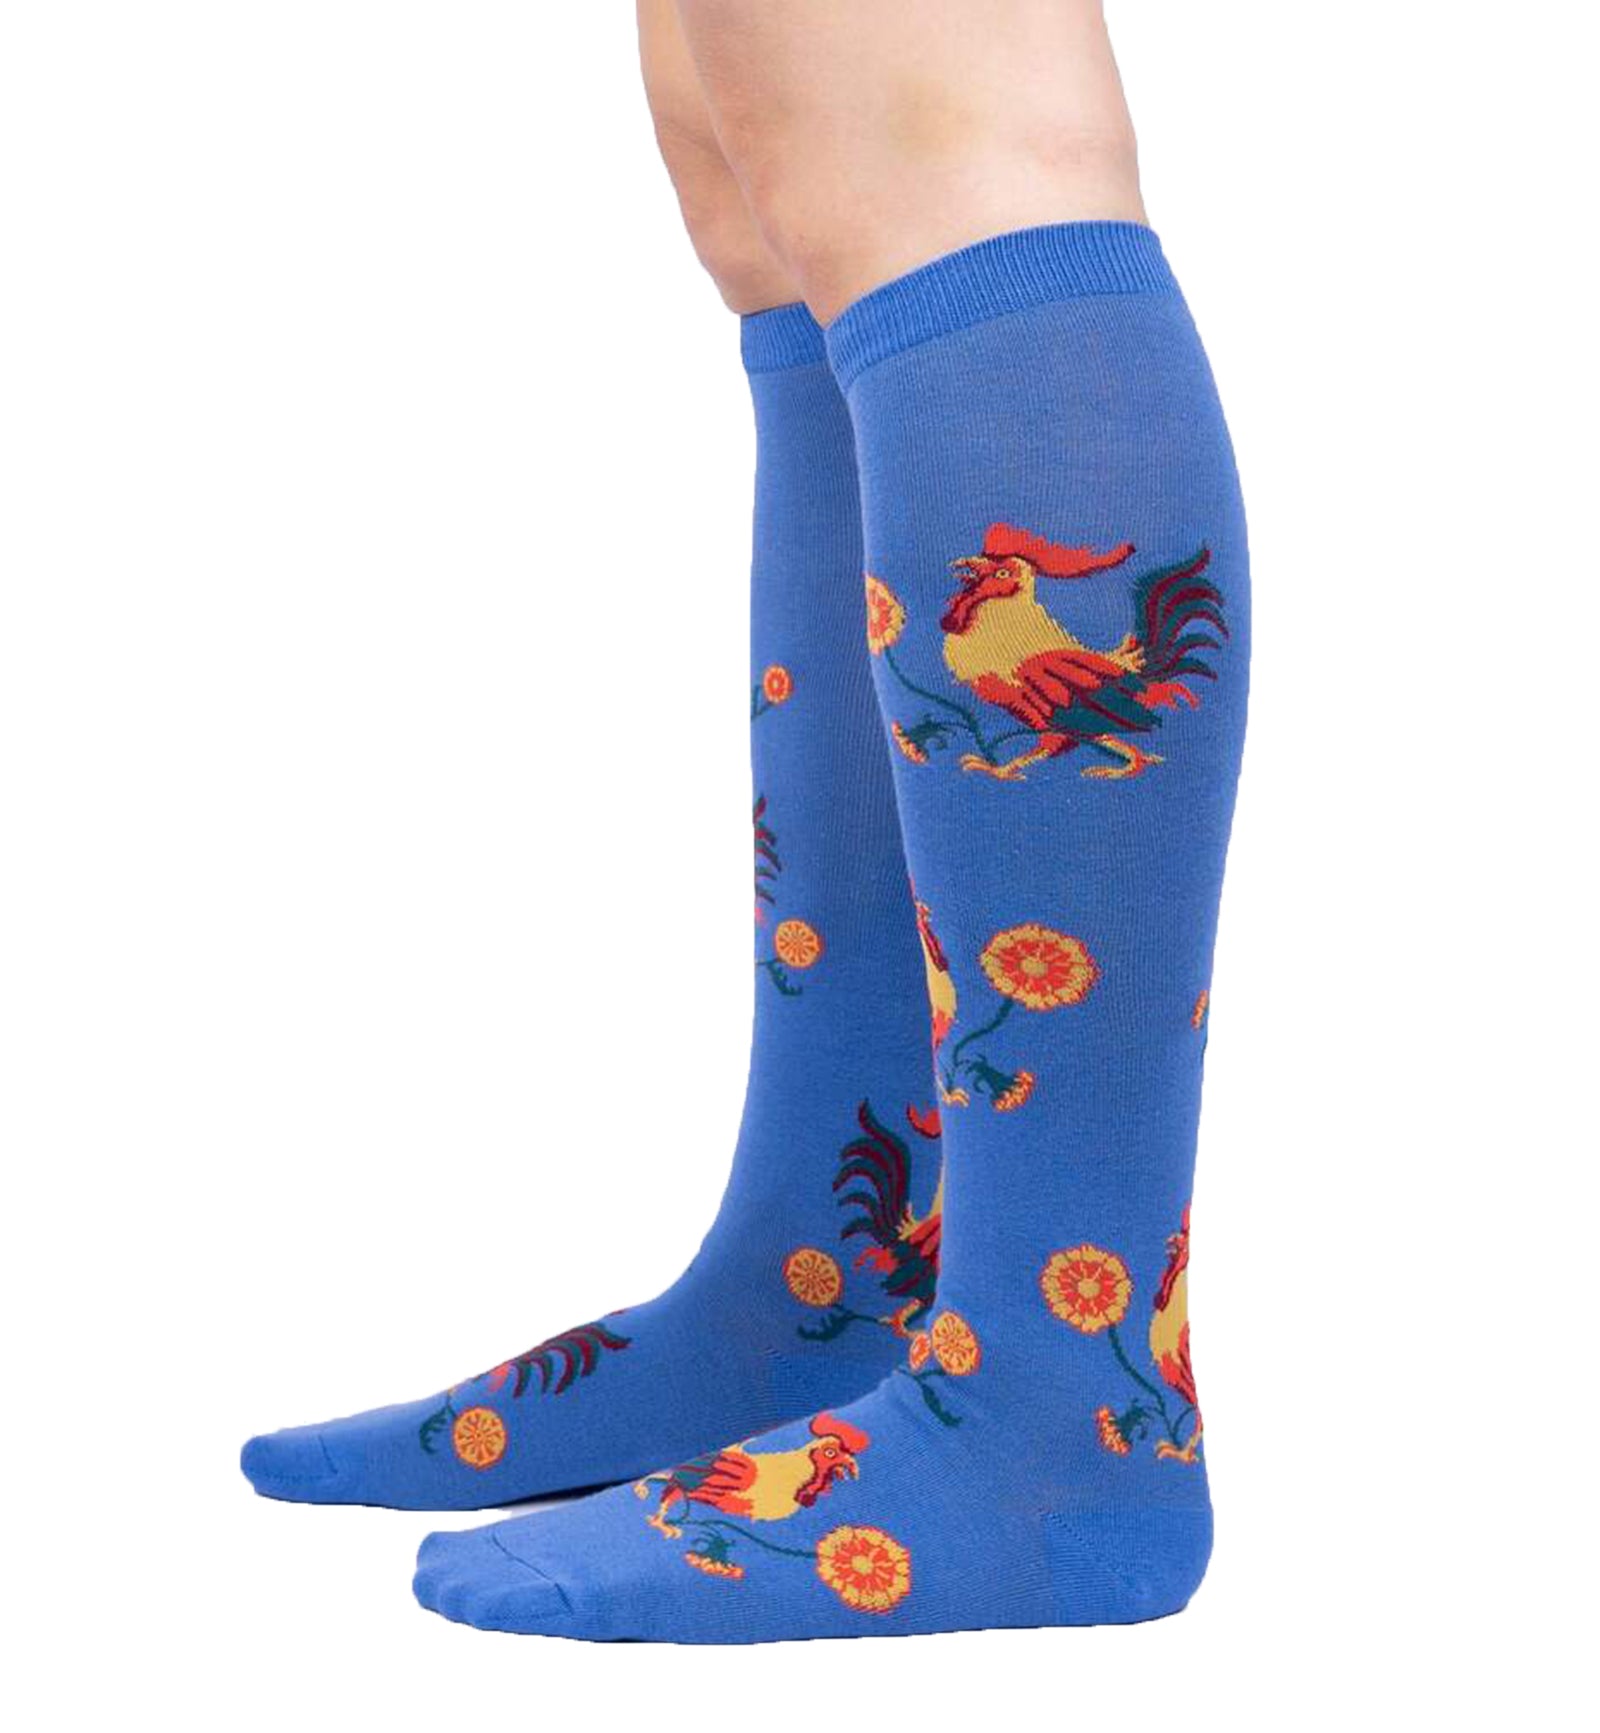 SOCK it to me Unisex Knee High Socks (F0616),Rise and Shine - Rise and Shine,One Size